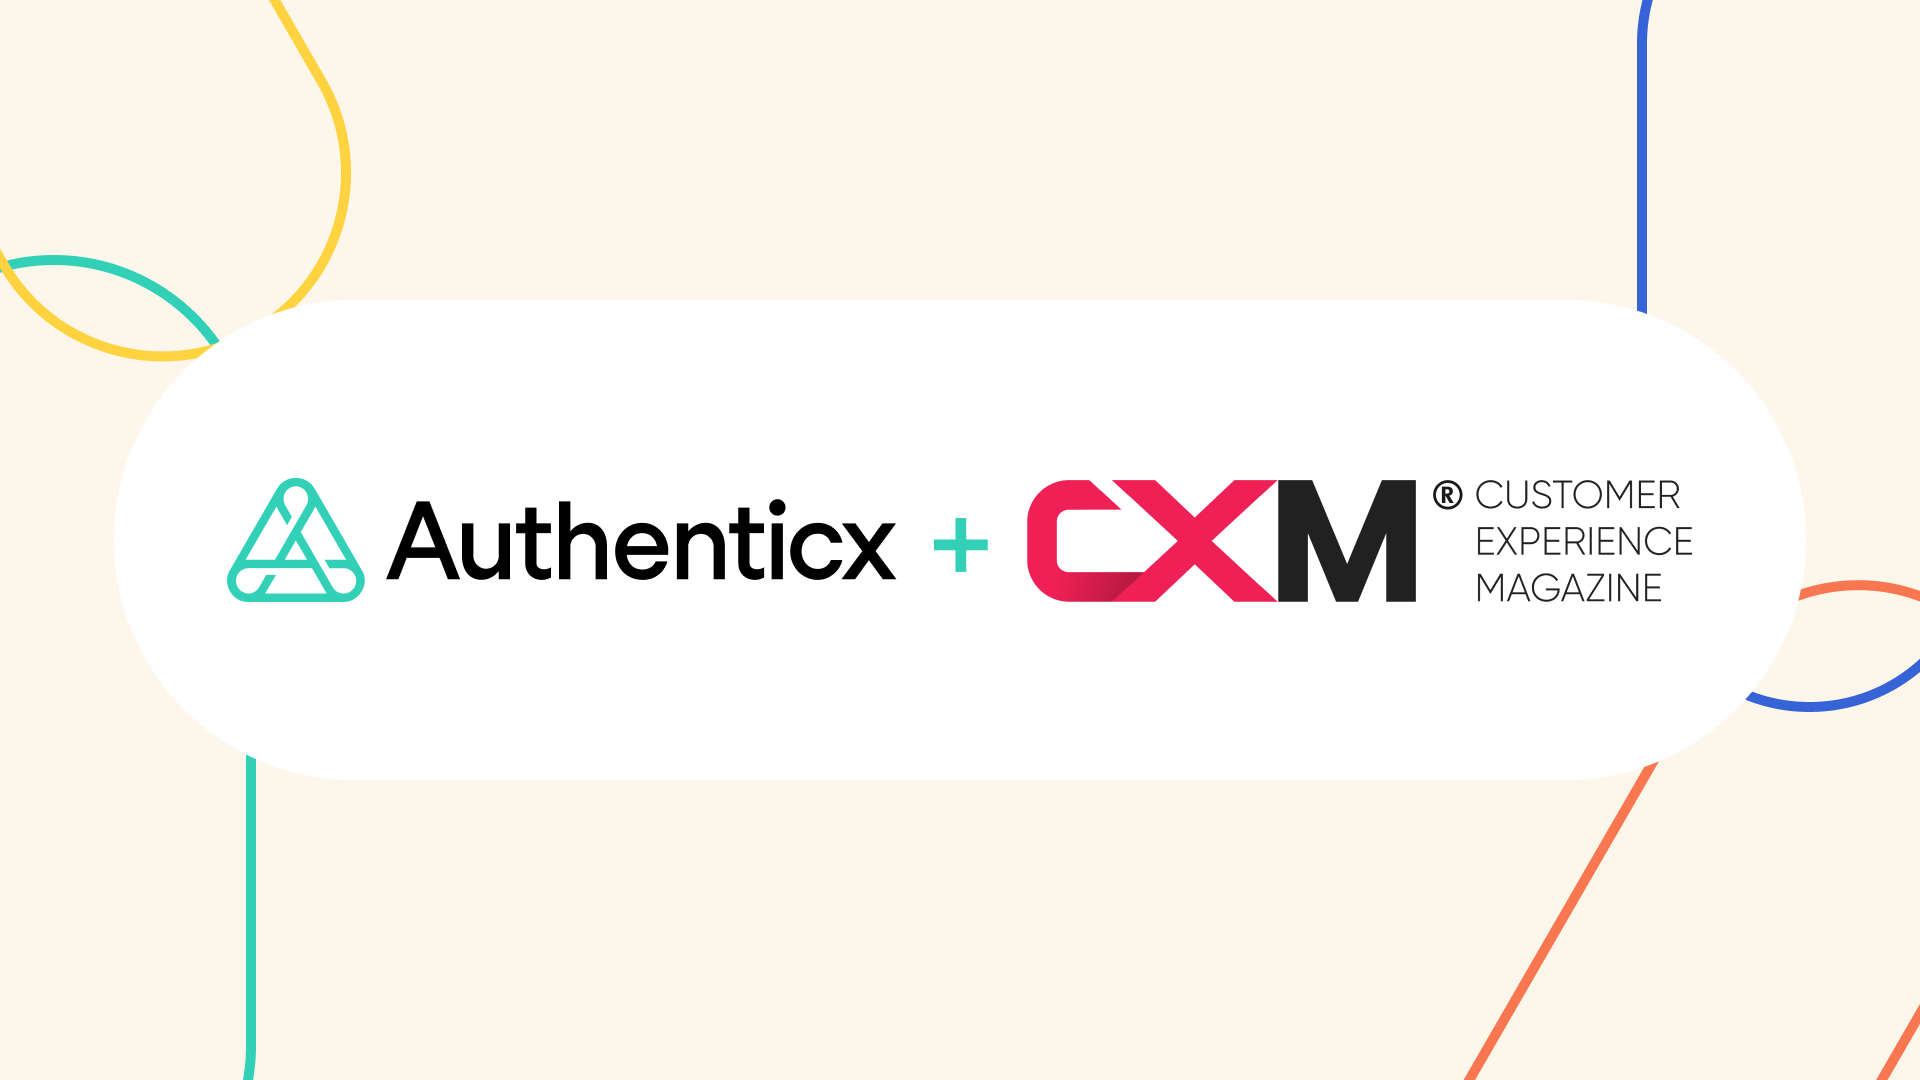 Authenticx Founder & CEO Amy Brown recently contributed a byline to Customer Experience Magazine (CXM) | Authenticx